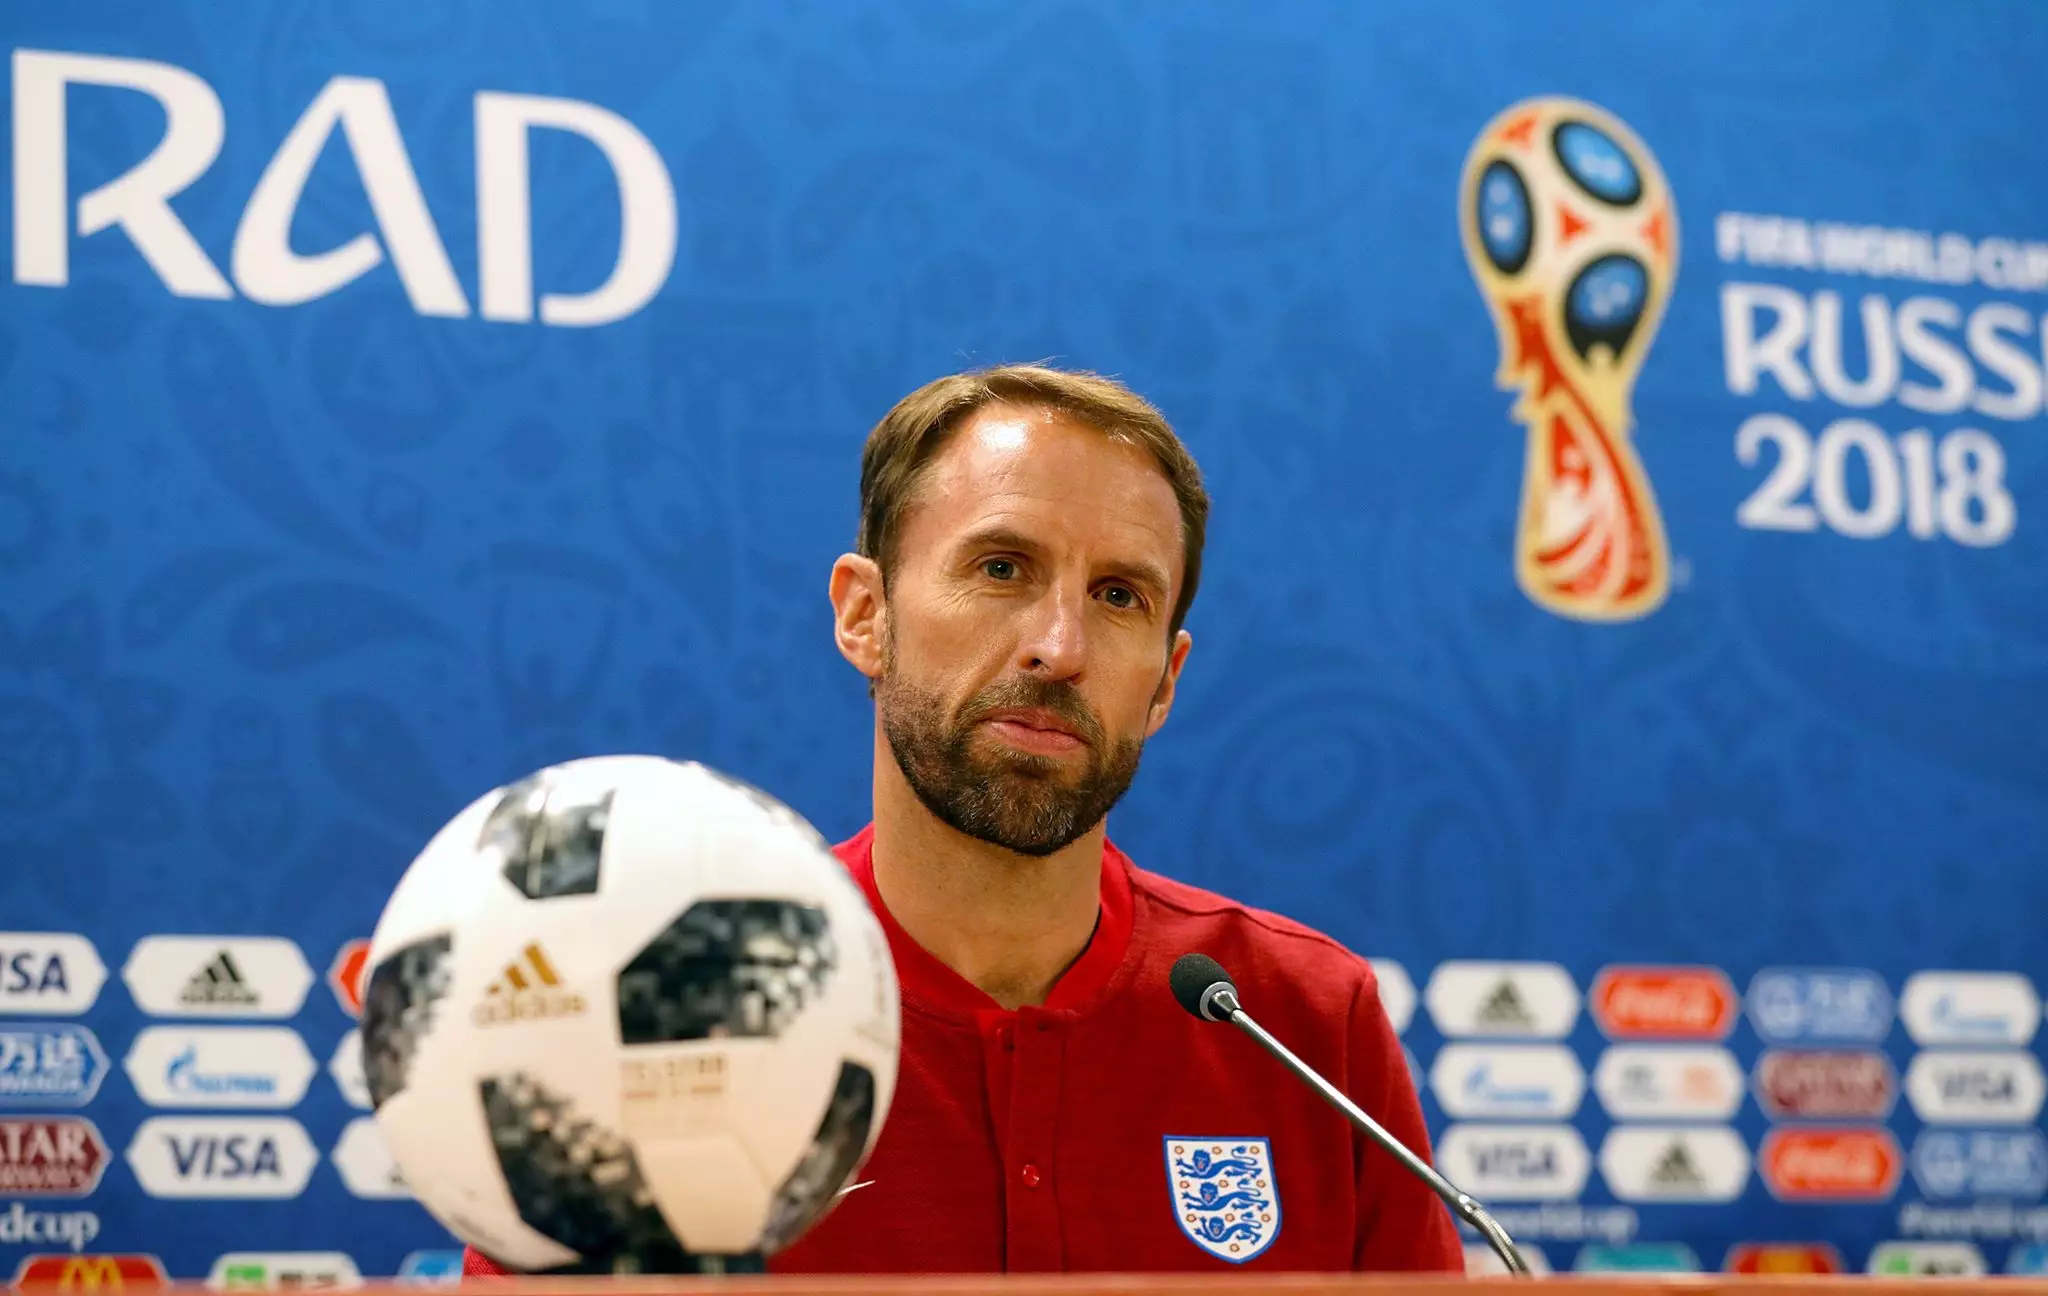 Will Southgate get it right in Russia? Image: PA Images